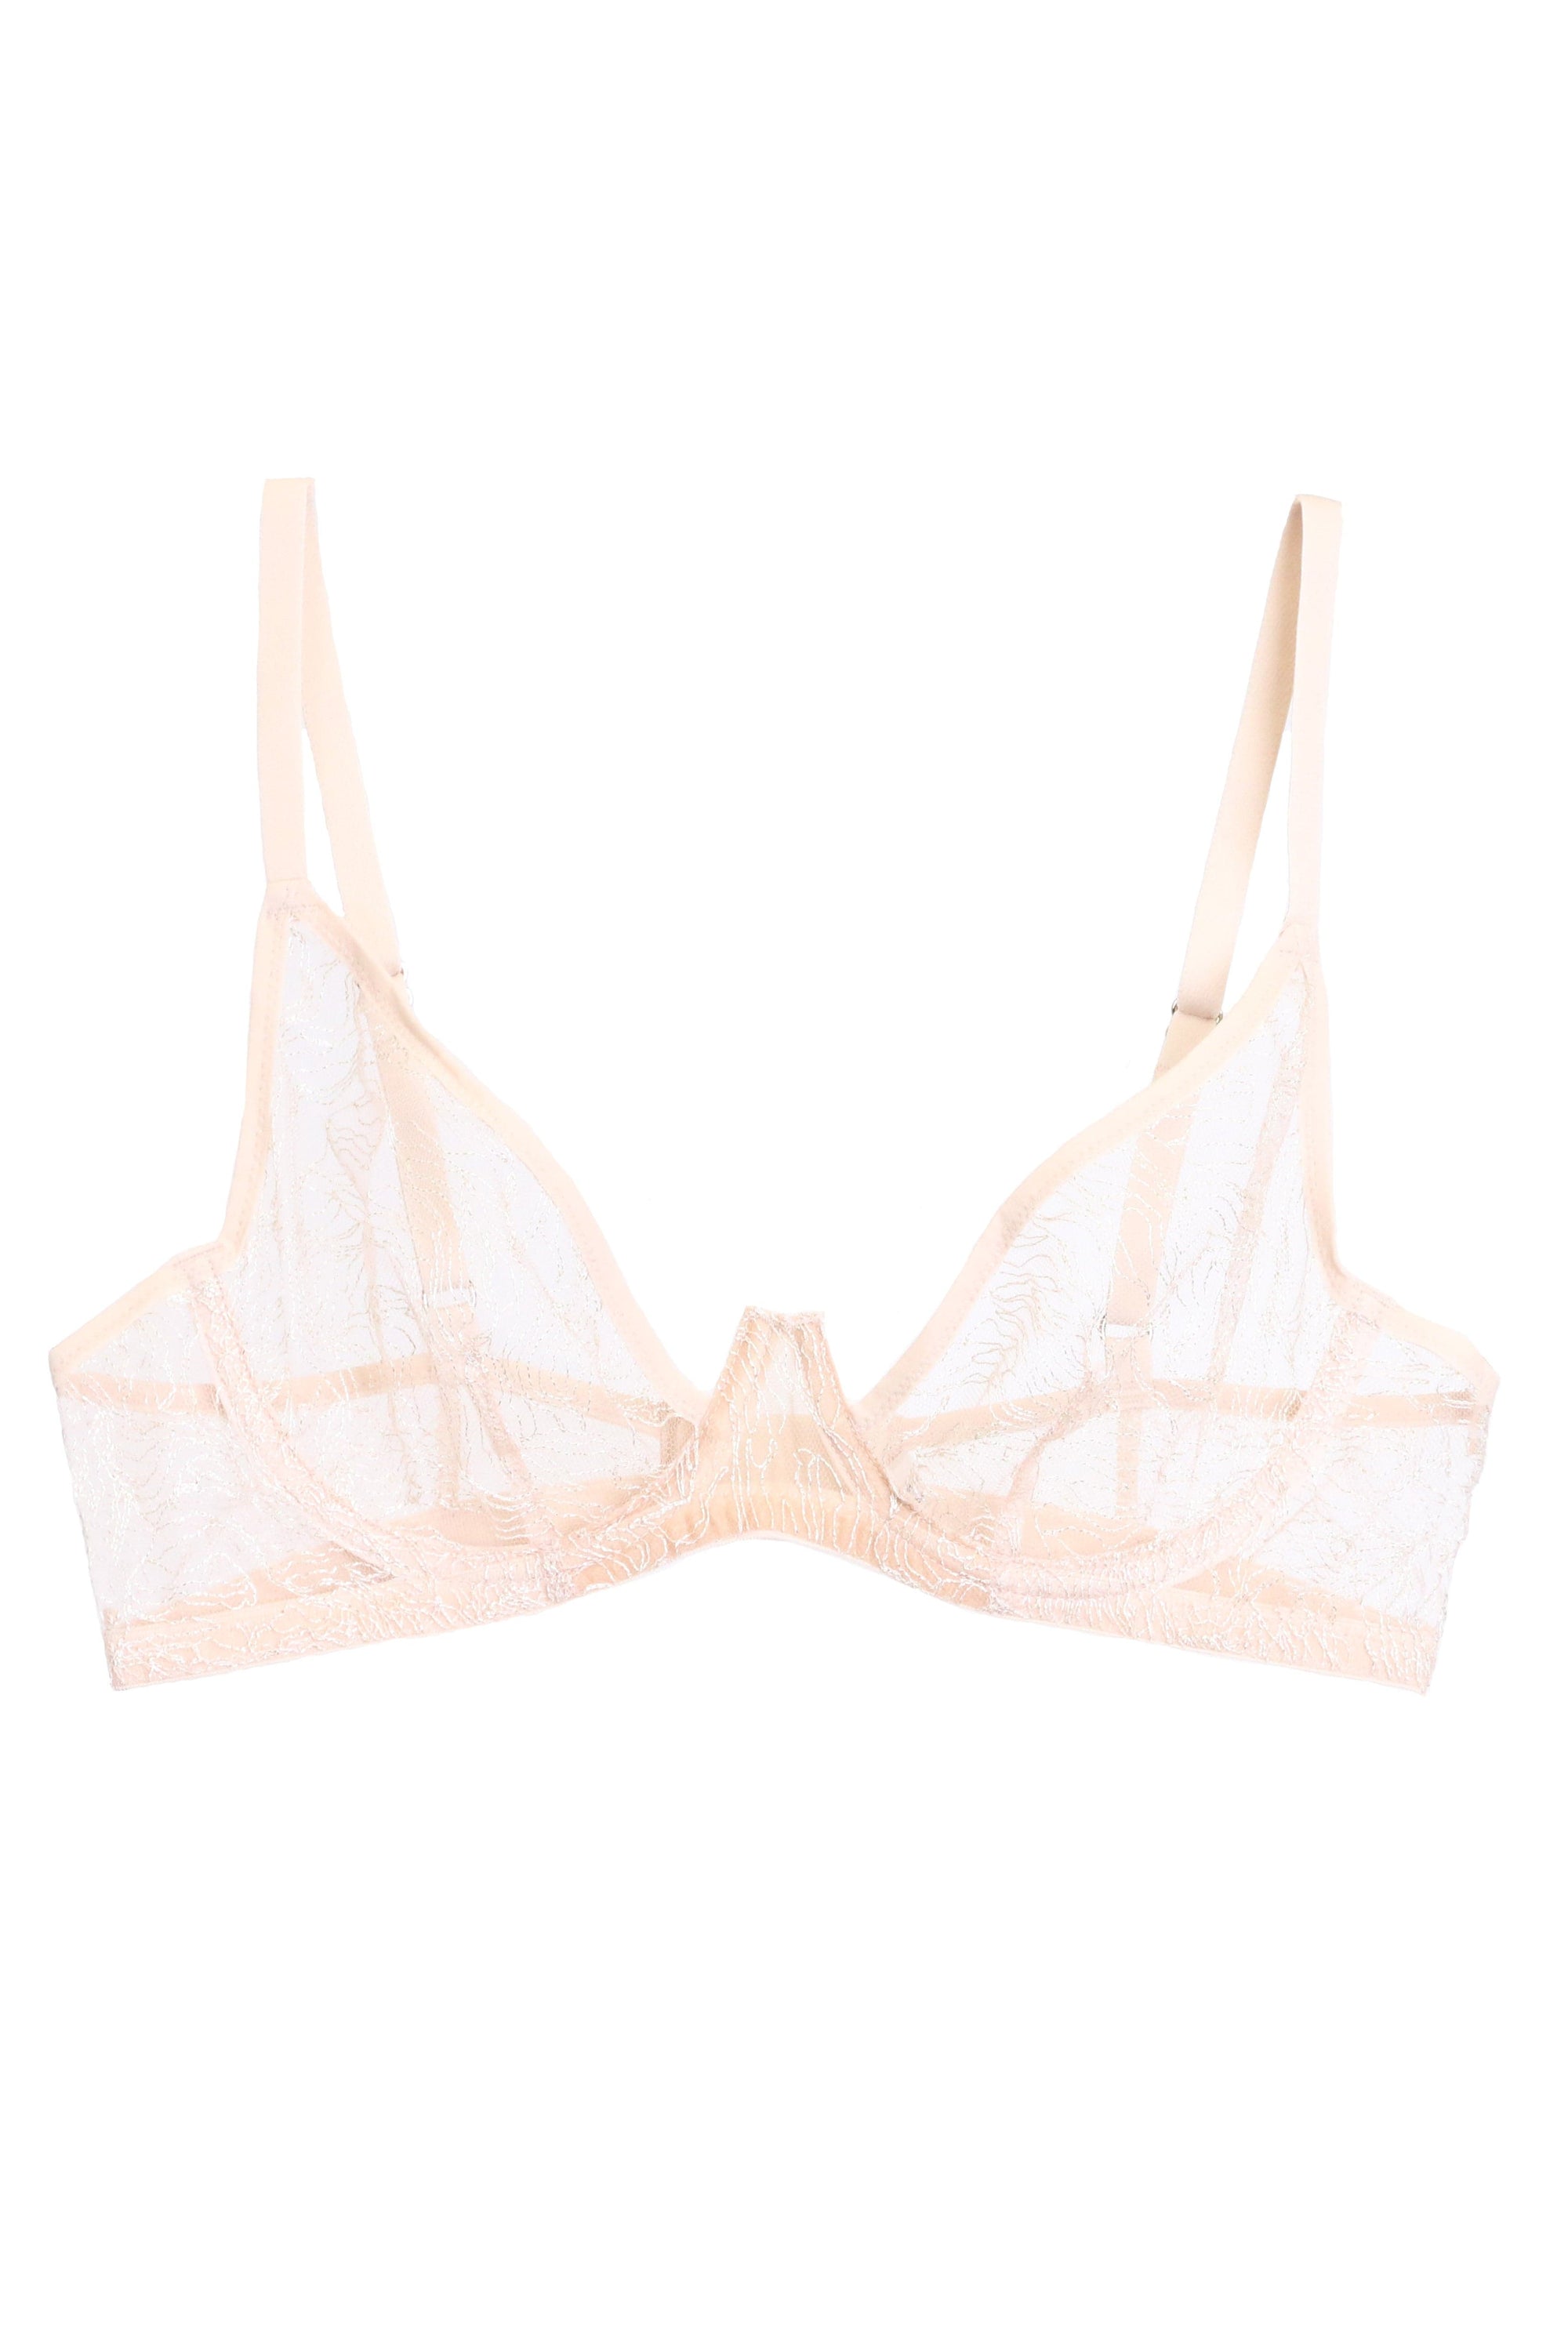 Classic Lift Silicone Bra - Nude - Chérie Amour